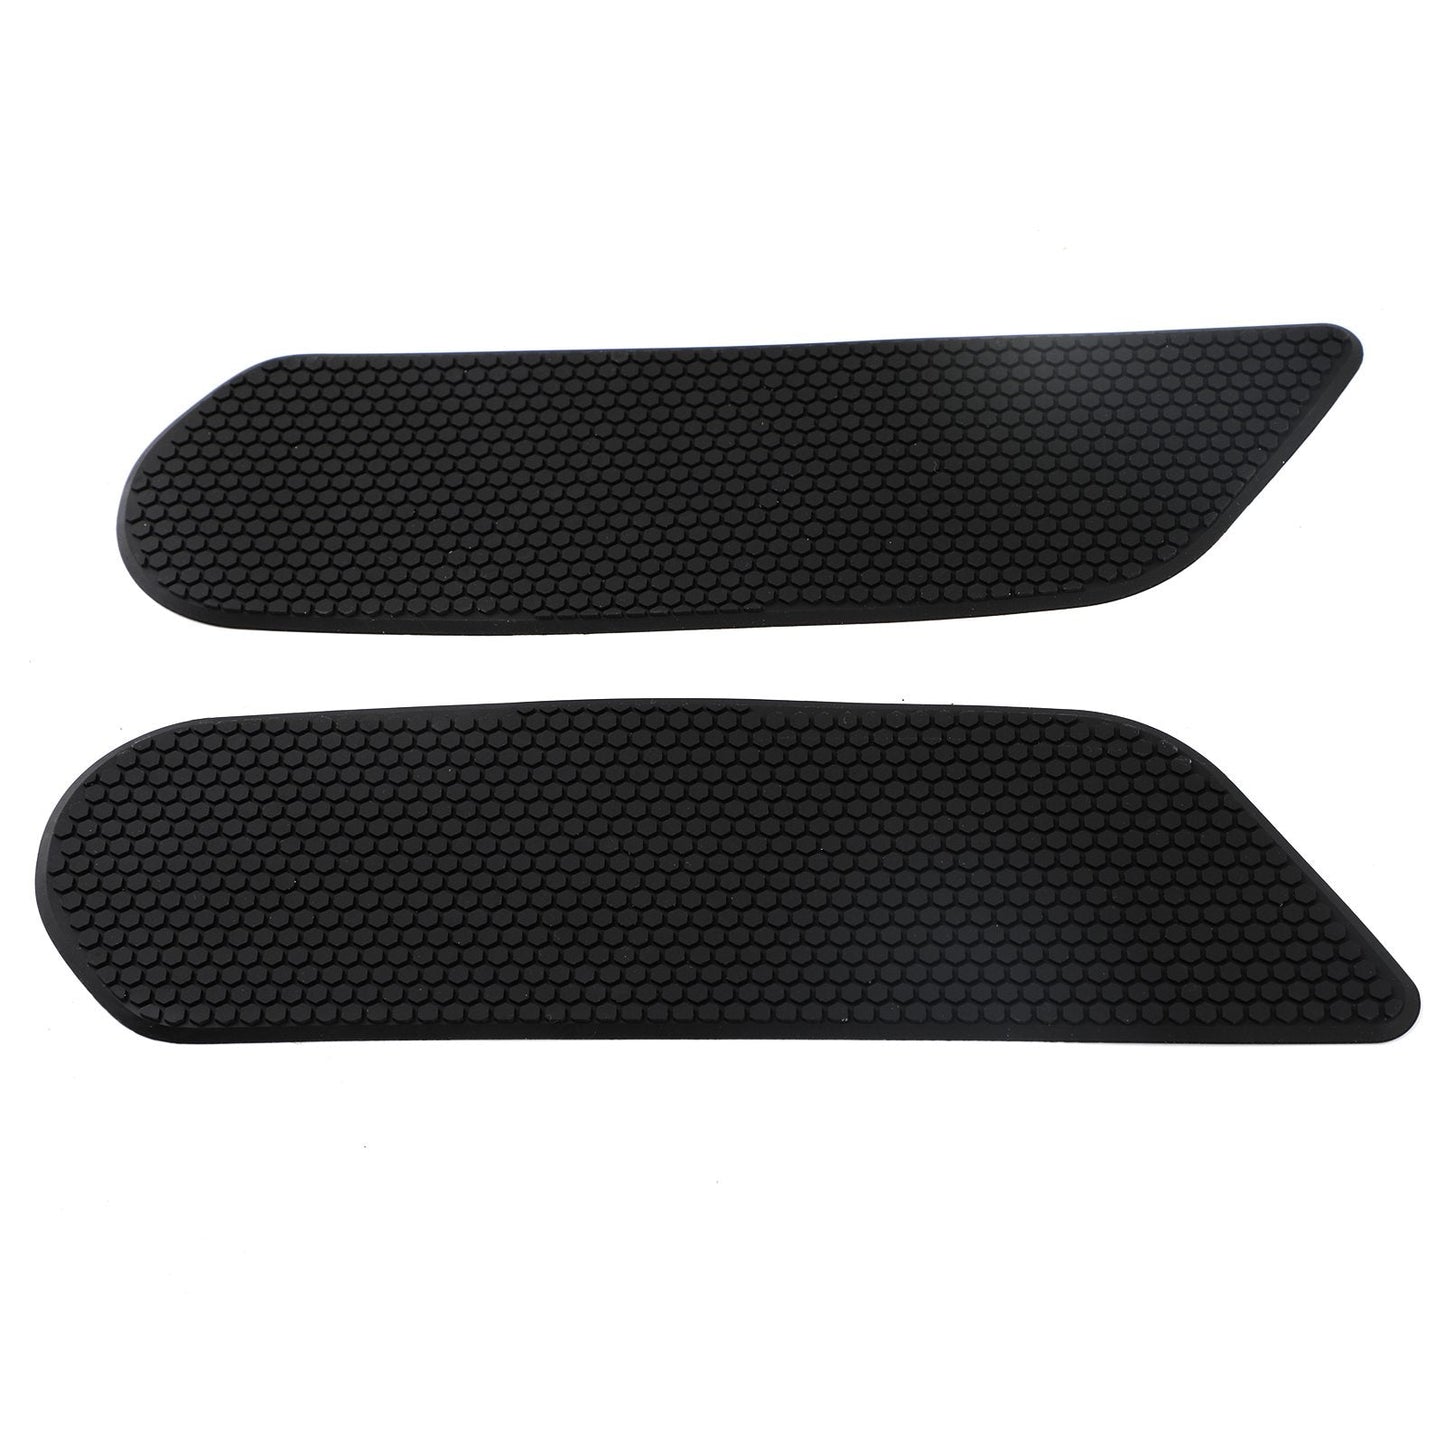 2x Side Tank Traction Grips Pads Fit for Kawasaki Z900 2017 2018 2019 2020